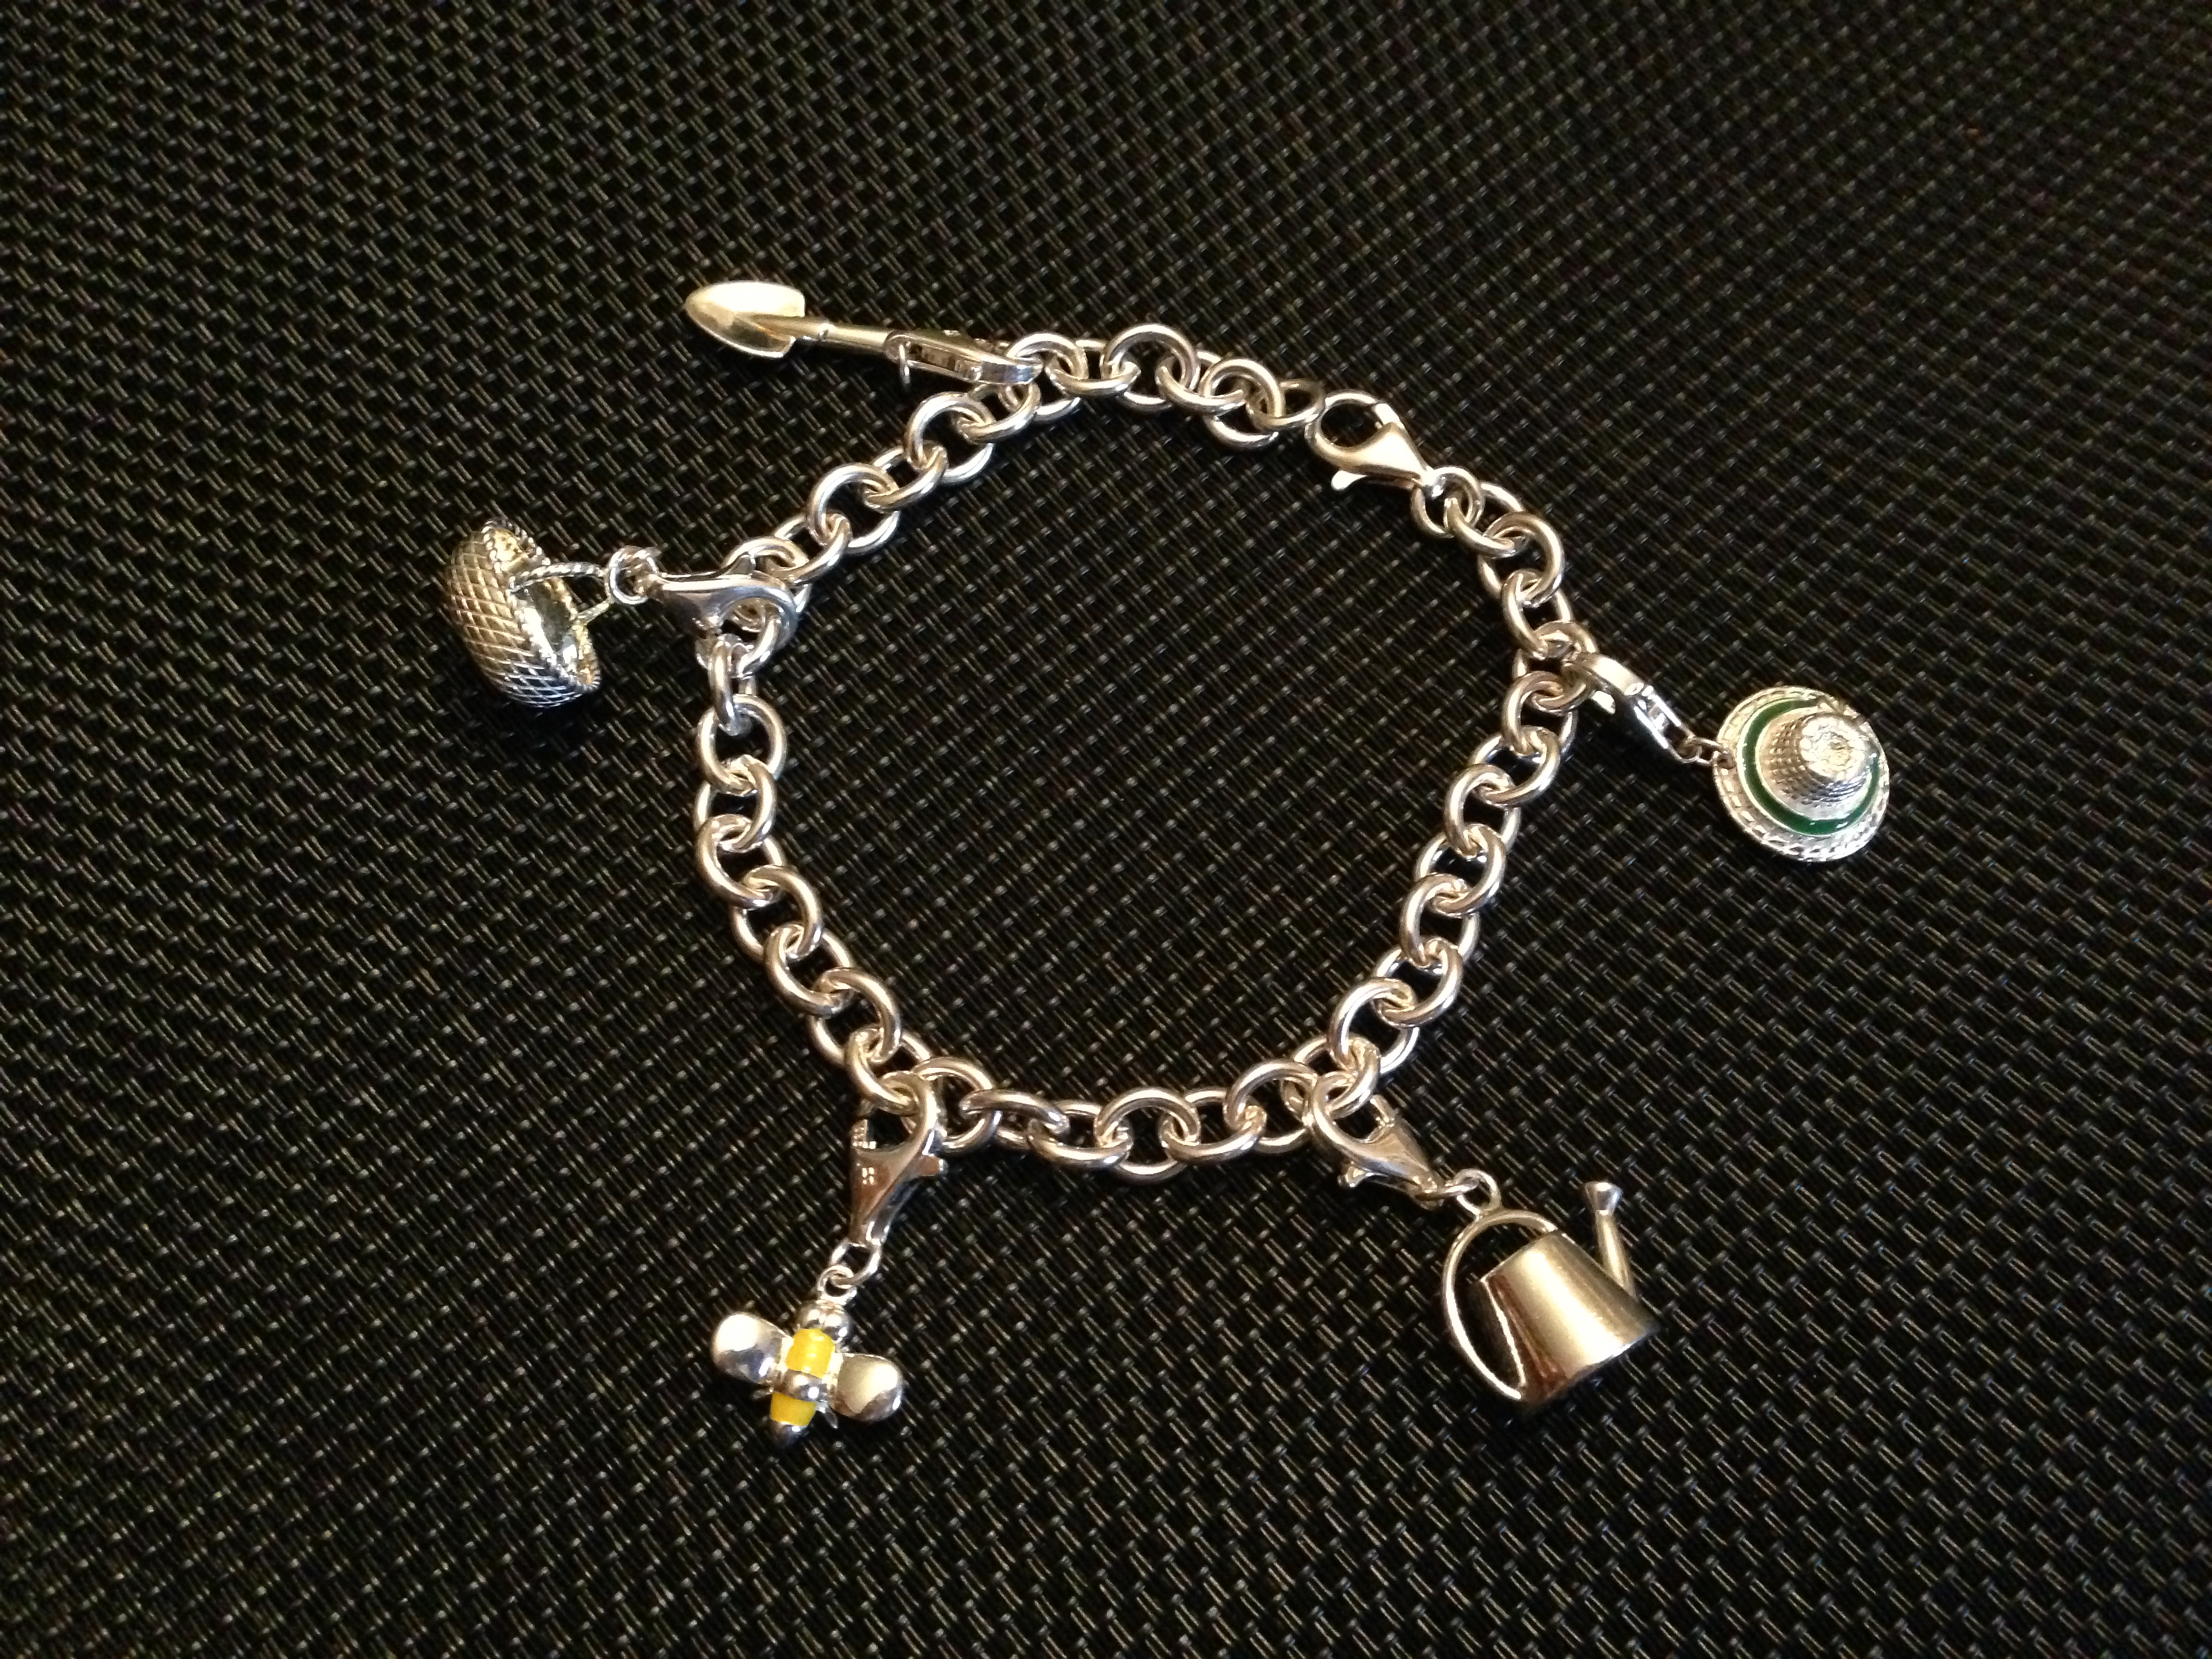 Sterling silver gardening-themed bracelet that a friend gave me.